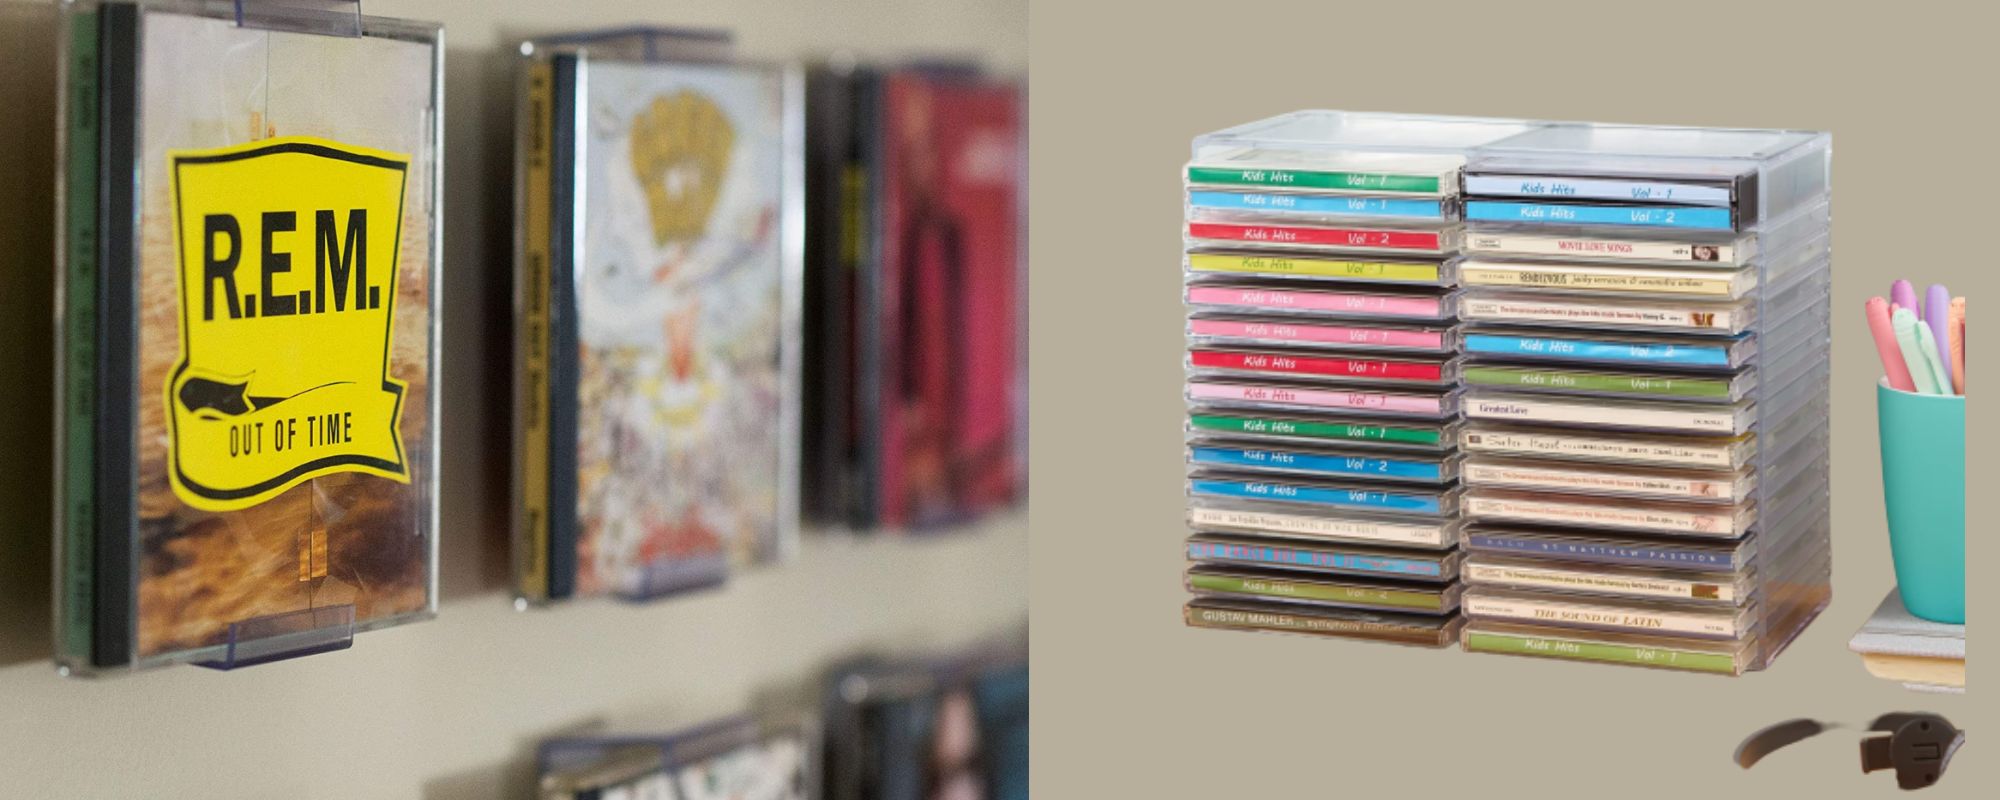 CDs Are Making A Comeback  Things You Should Know Before You Start  Collecting 